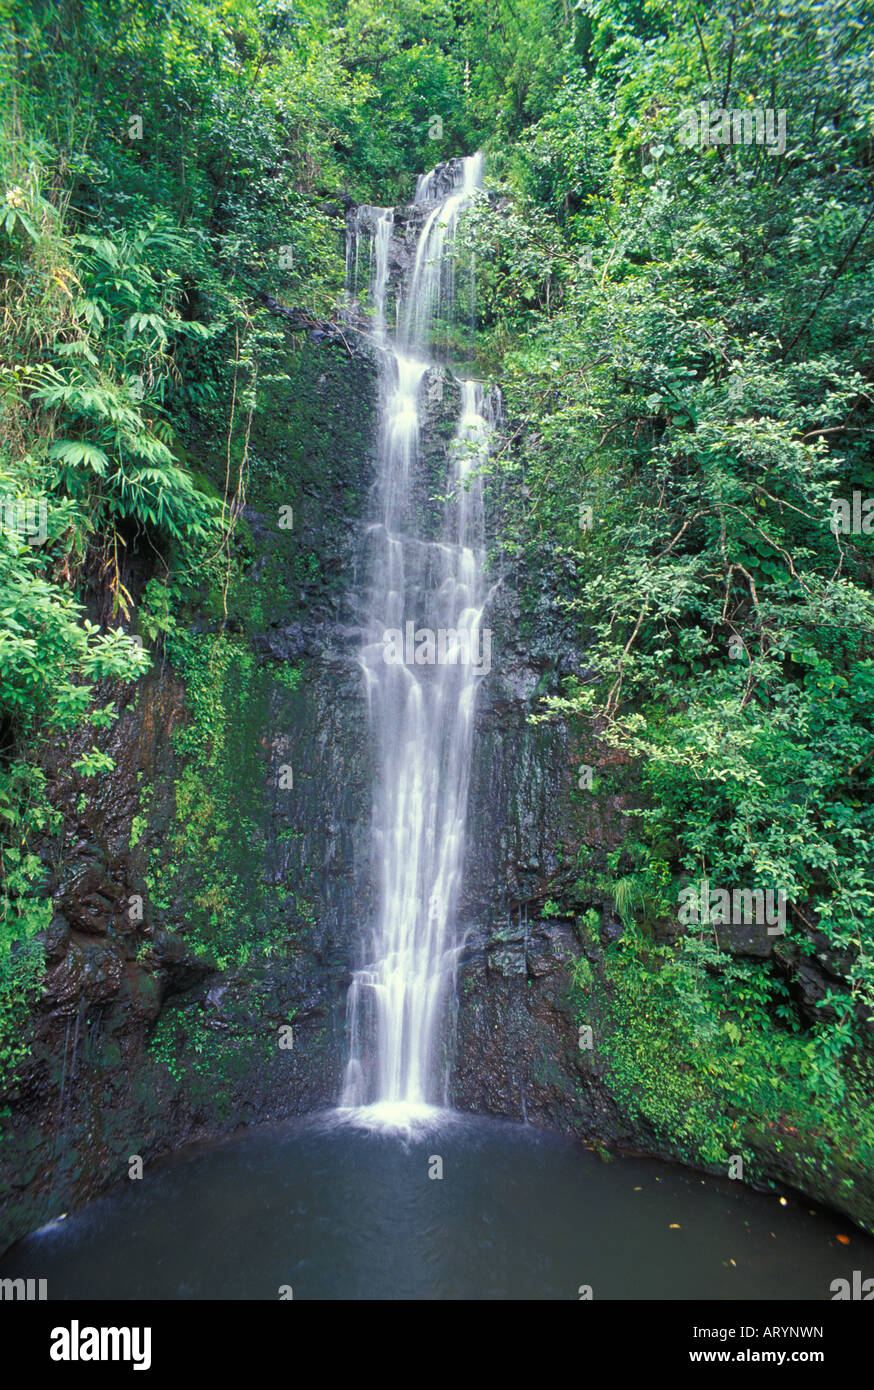 Waterfall in Haleakala National Park at Kipahulu or otherwise known as "Seven Sacred Pools" or 'Ohe'o Gulch. Stock Photo